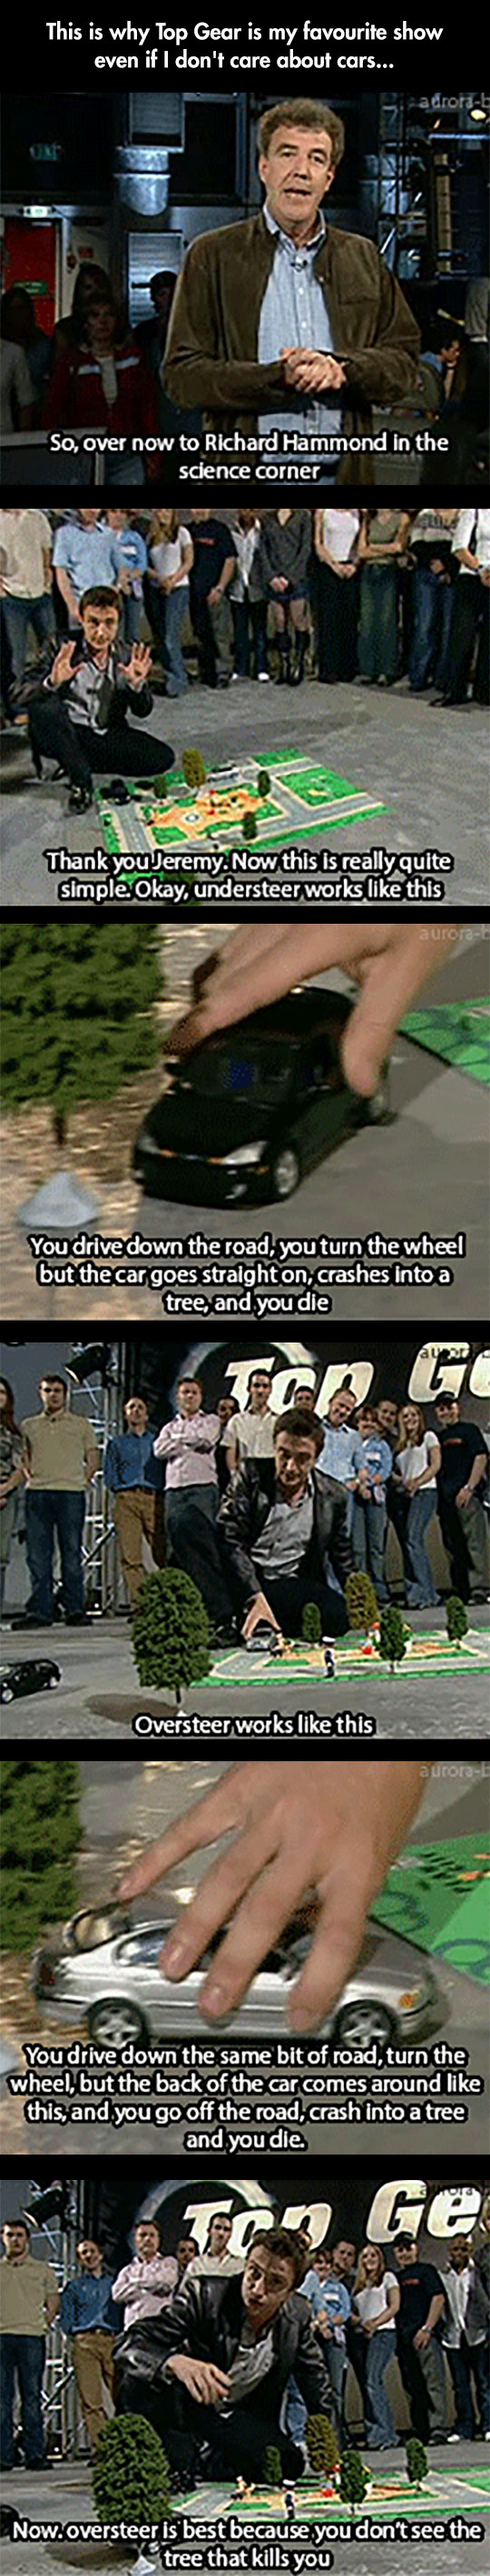 What makes Top Gear a great show…